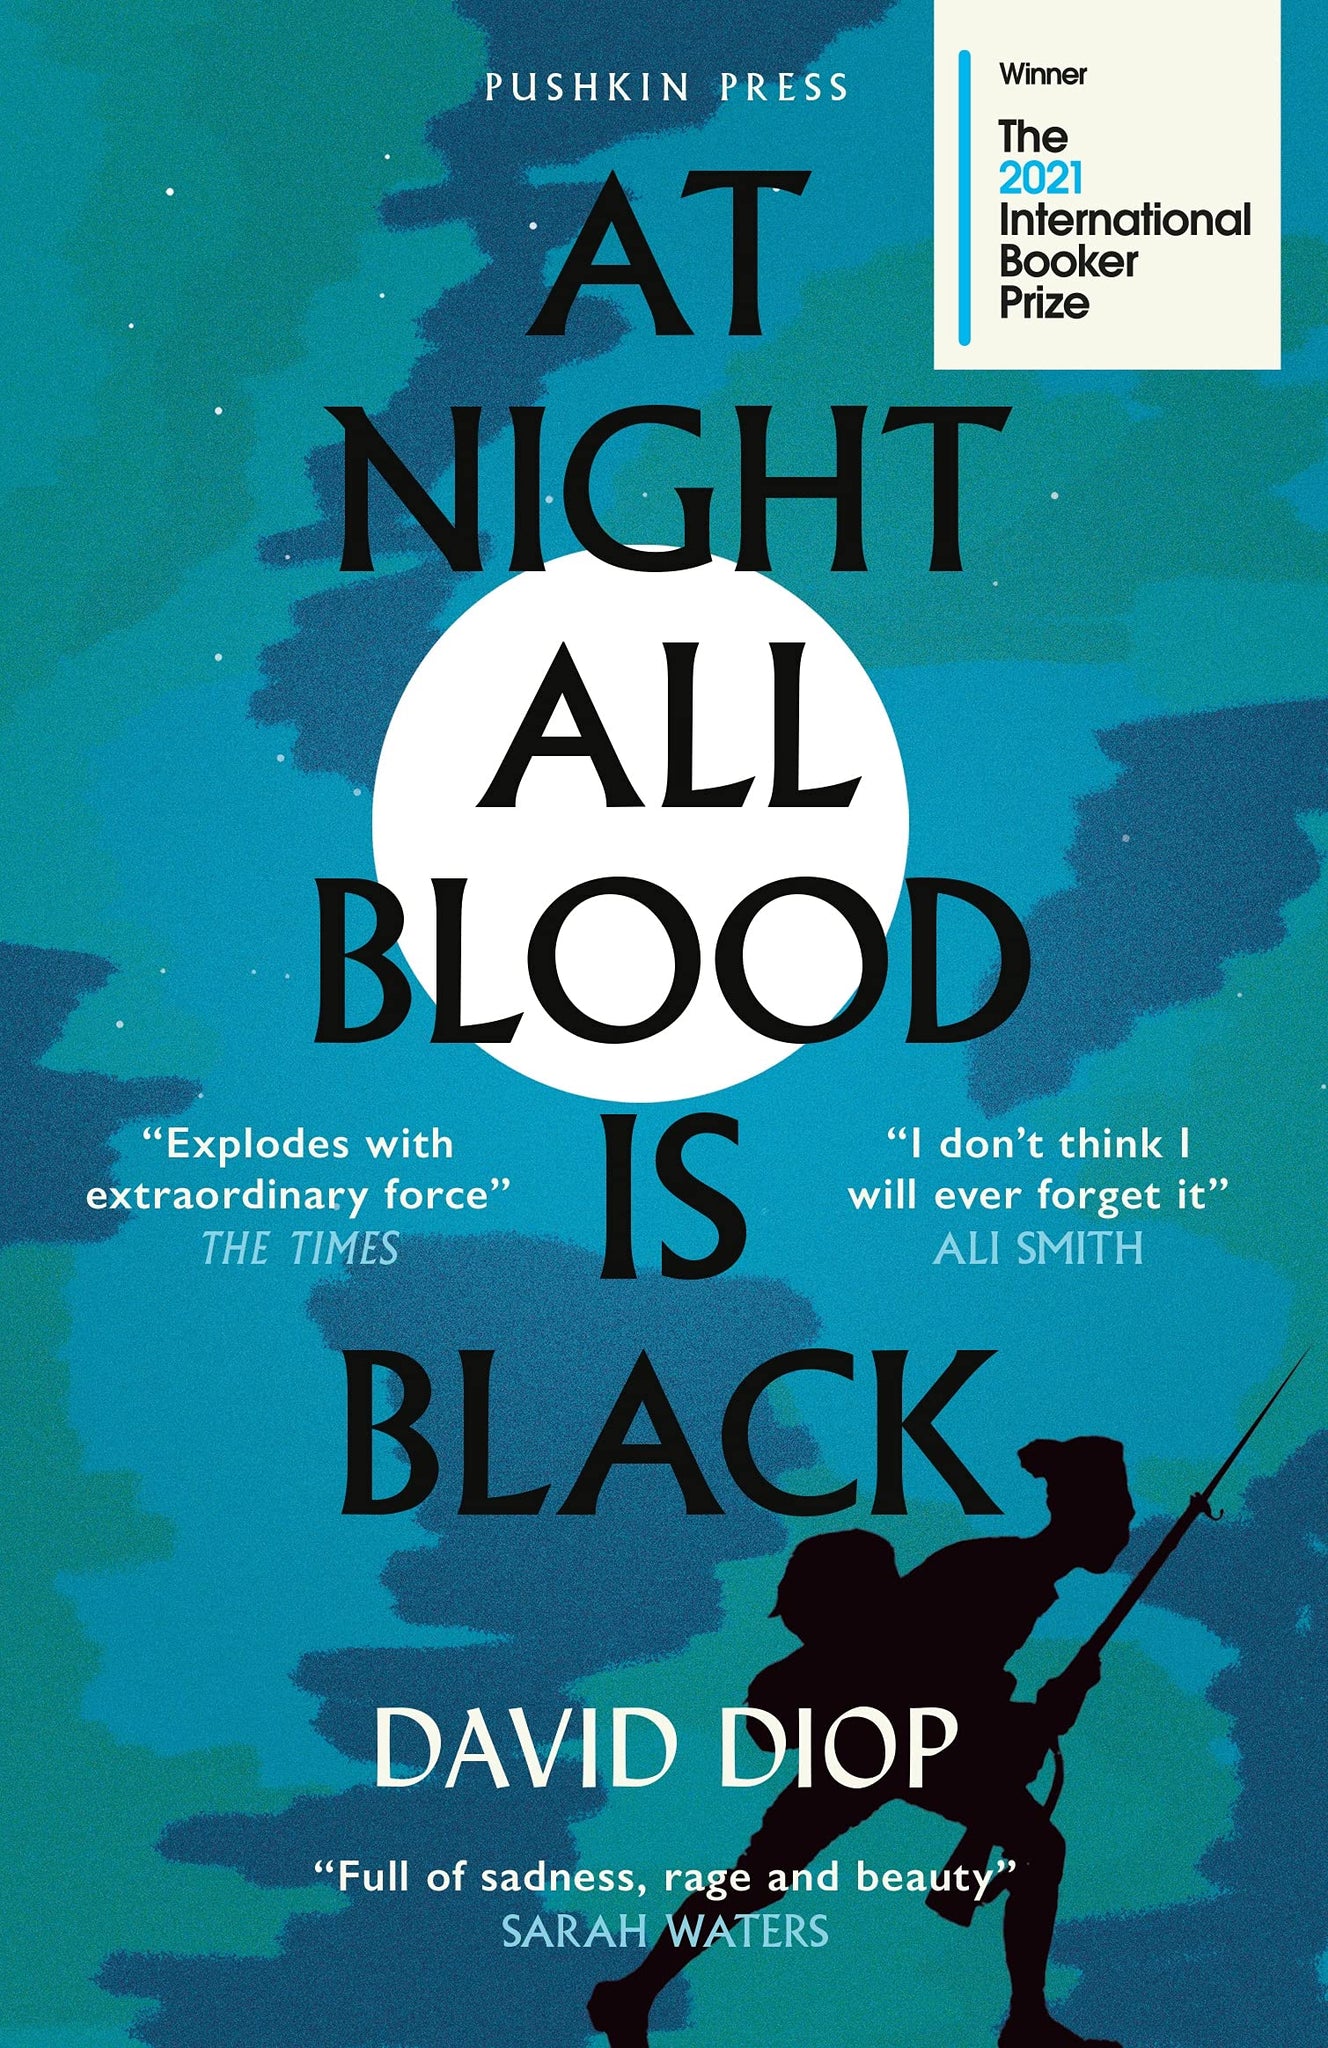 At Night All Blood Is Black: Winner of the International Booker Prize 2021